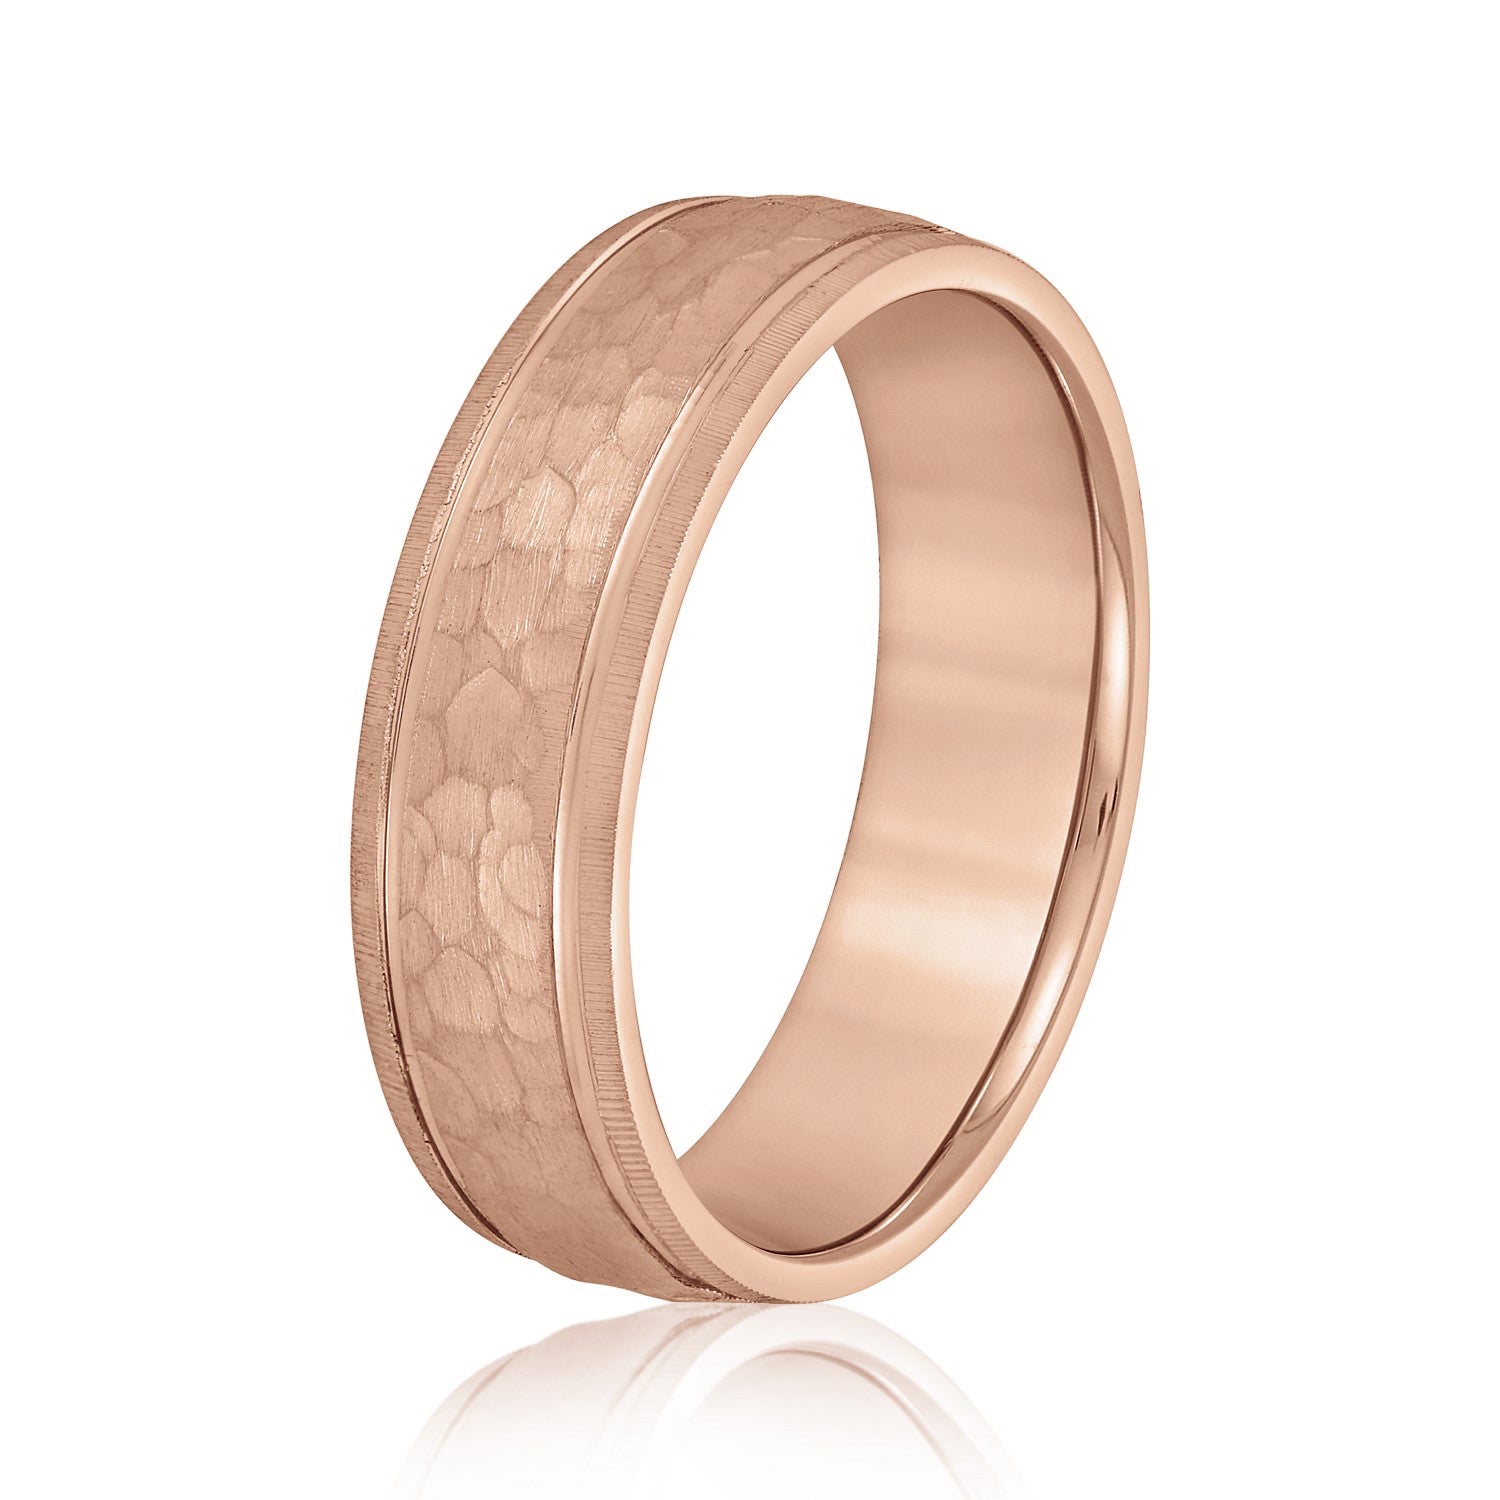 Men's Hammered Grooved Edged Band